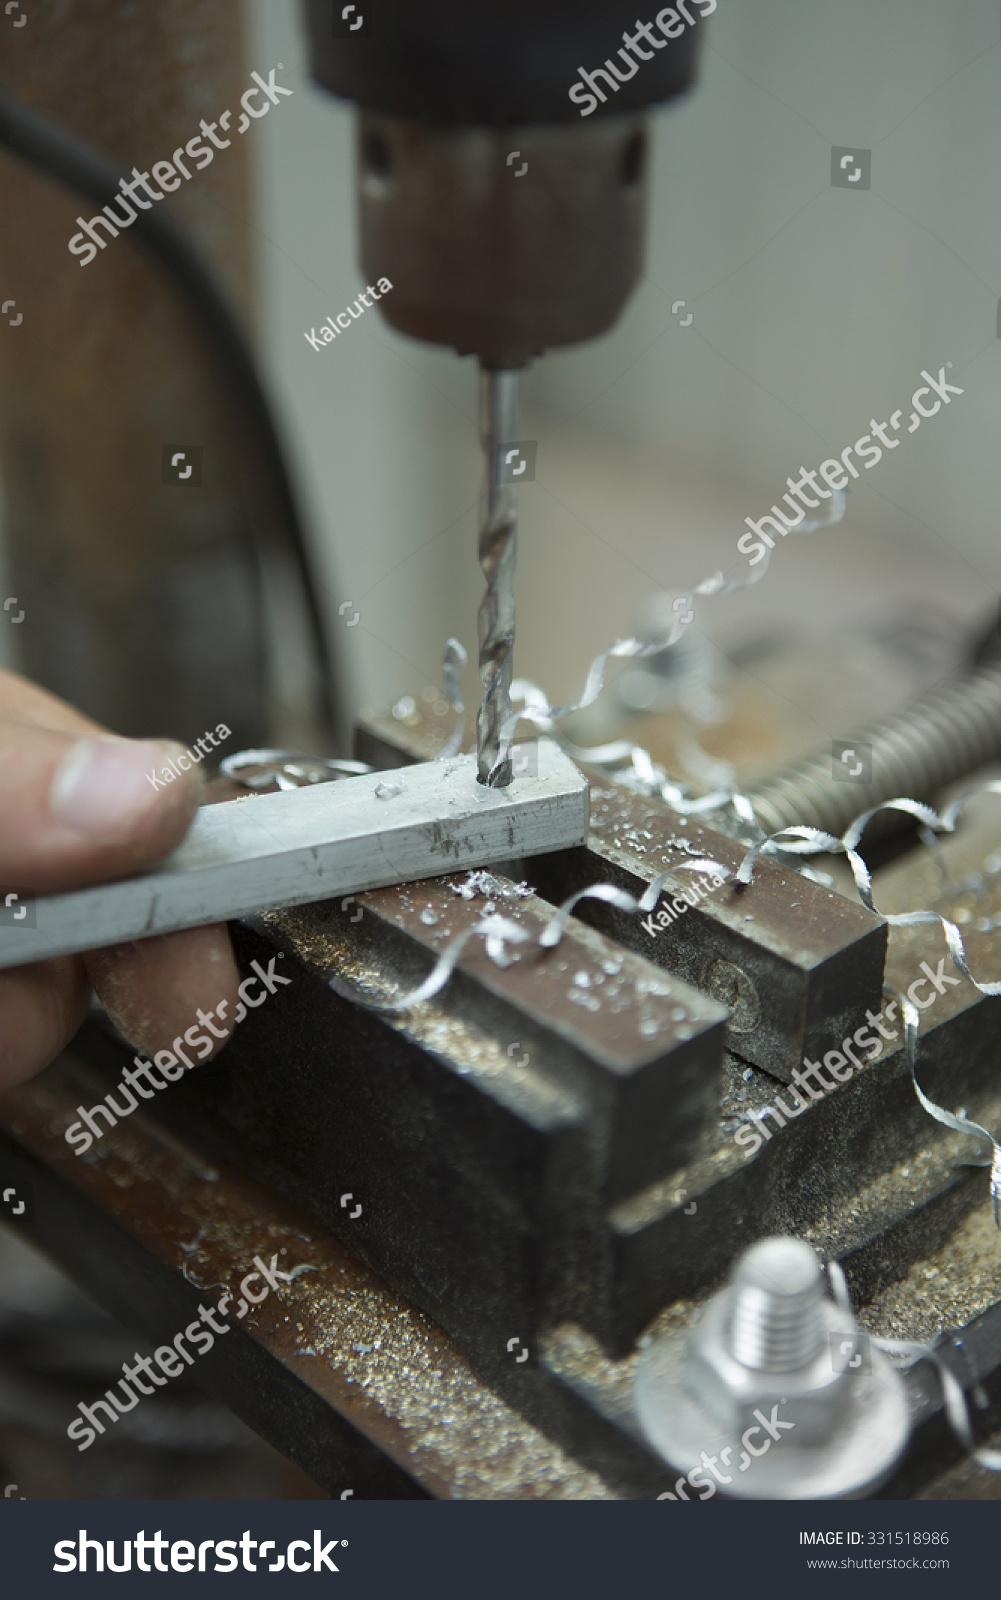 Man drilling in Steel Plate with Bench Drill. Close-up Electric drilling machine with manual pressure, a man holding a metal part and the hole is drilled, pressing drill to the workpiece surface #331518986